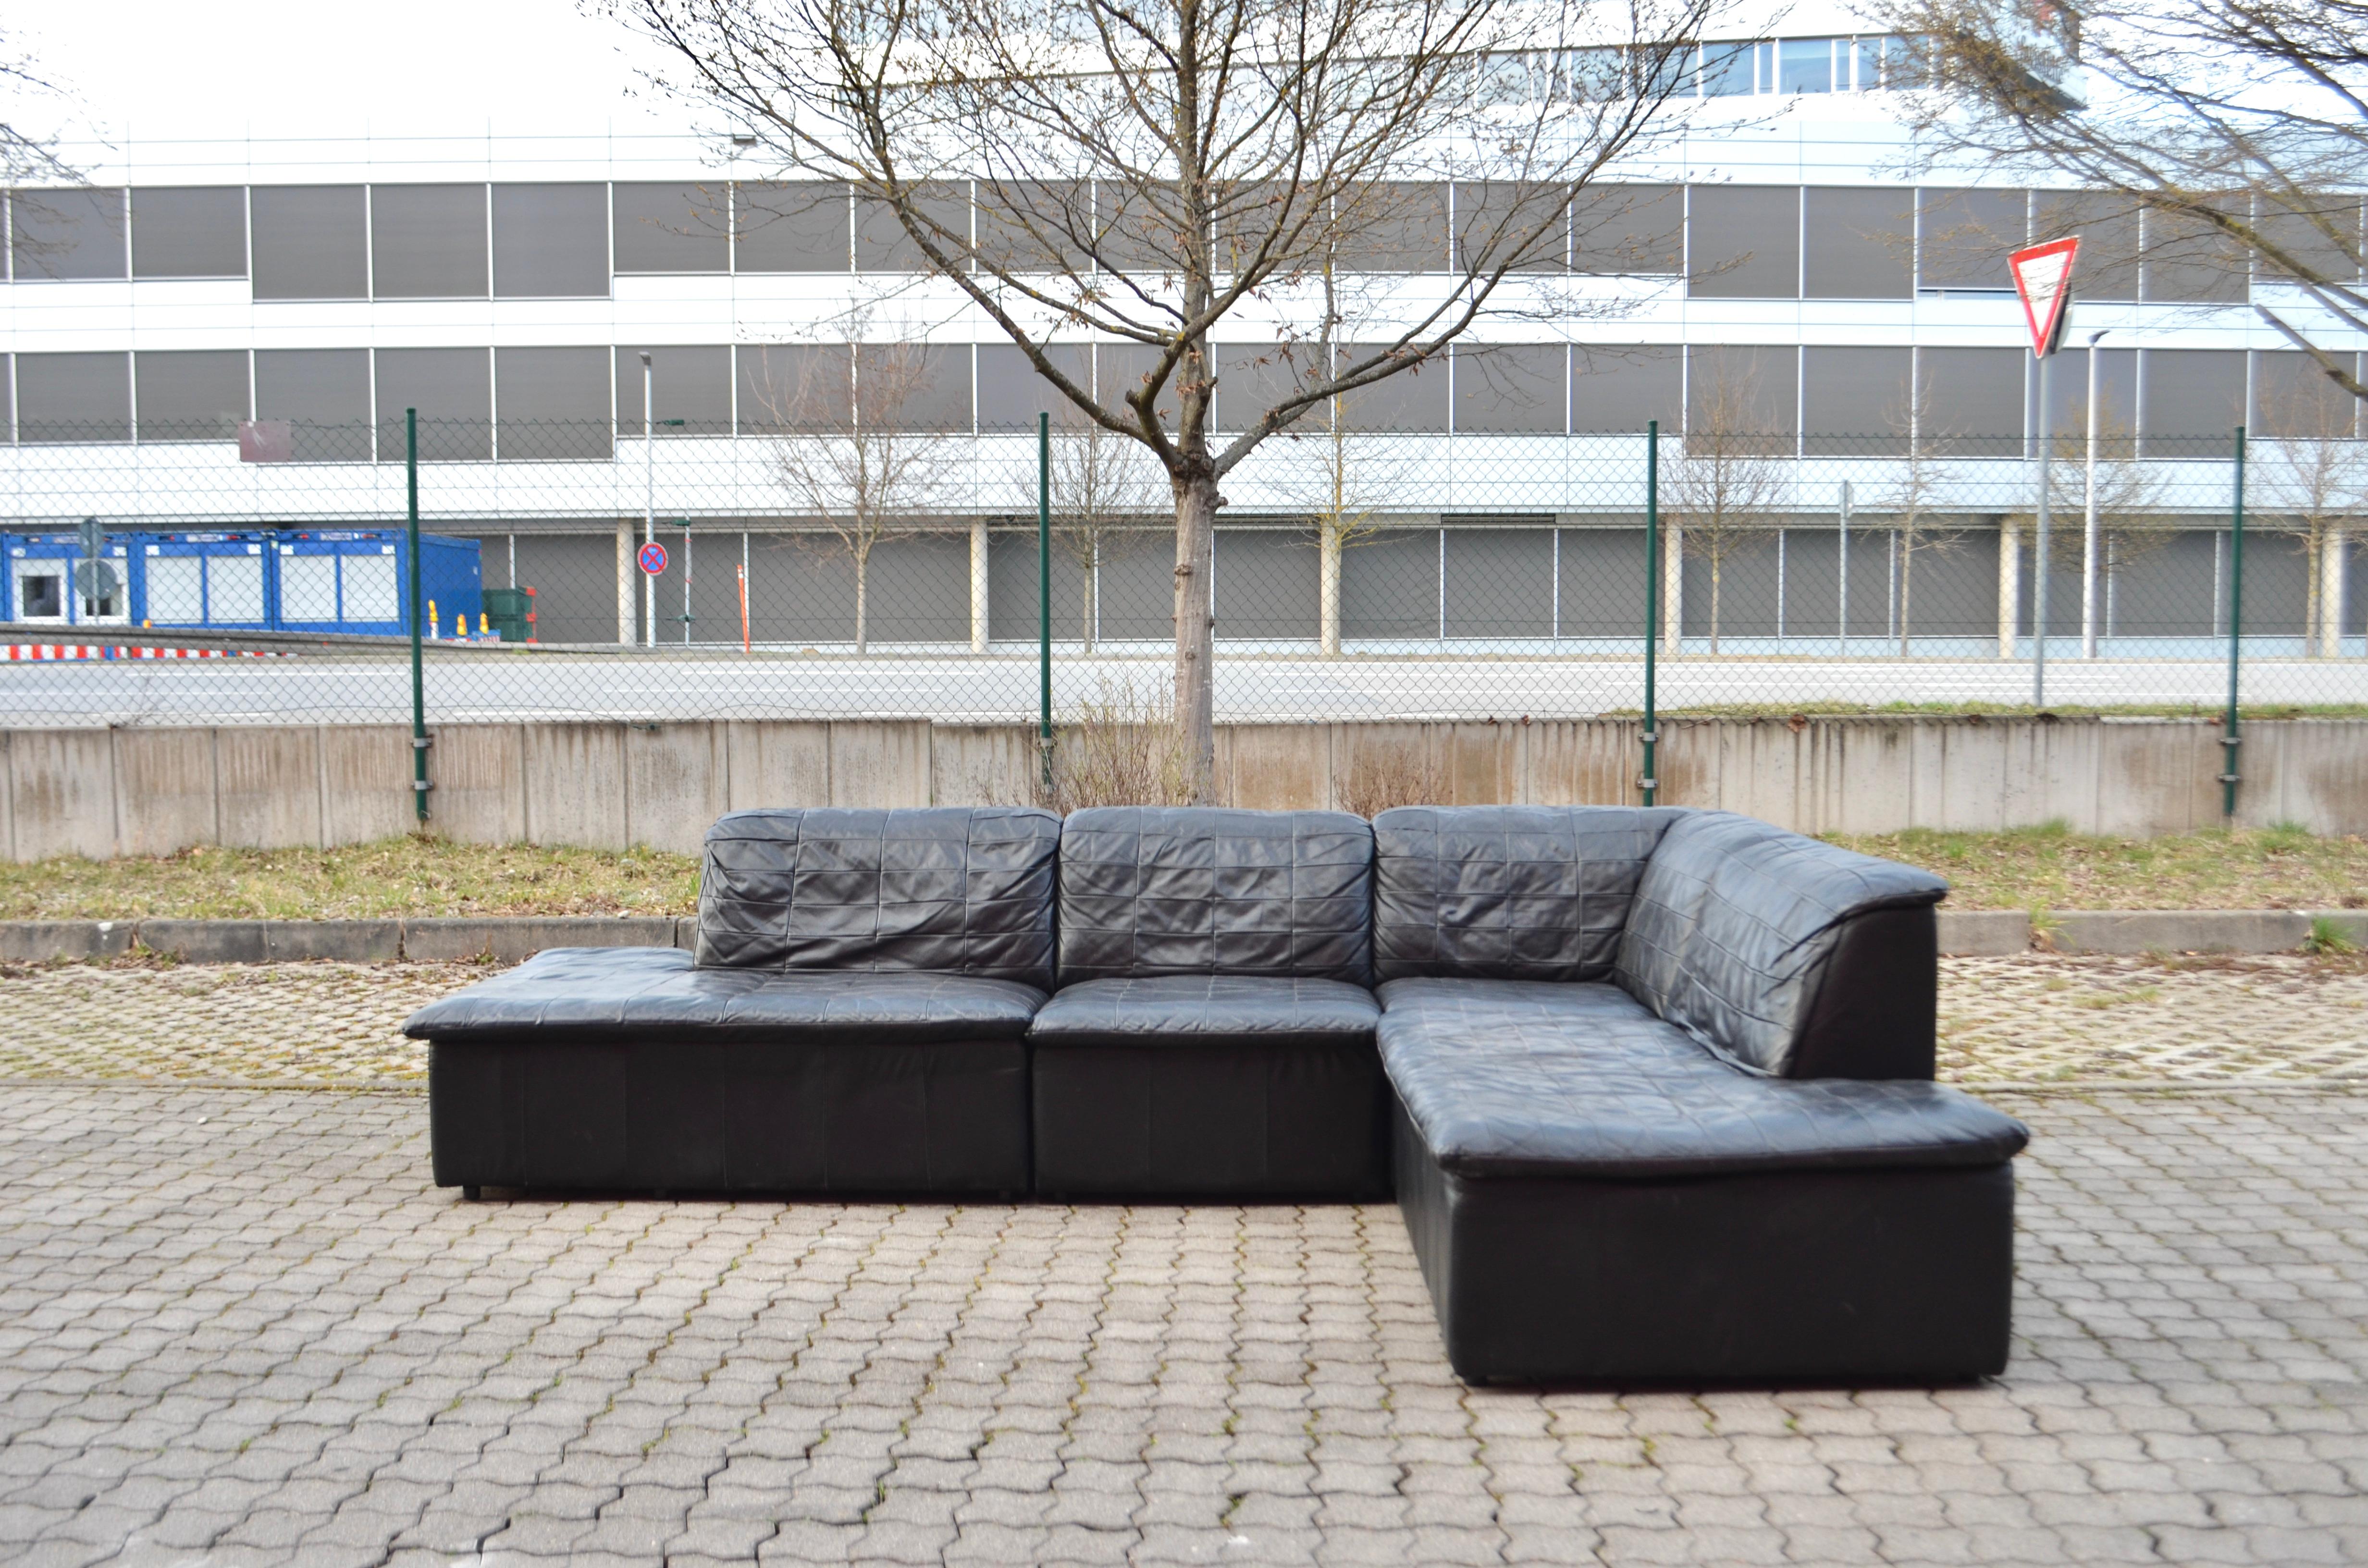 Laauser leathersofa in Patchwork Leather.
Modular sofa in black aniline leather.
Original from the 1970s
On the side the elements has the farbric.
So it can be used only as a L Sofa on both sides or as a large Sofa.
This sofa consists of 4